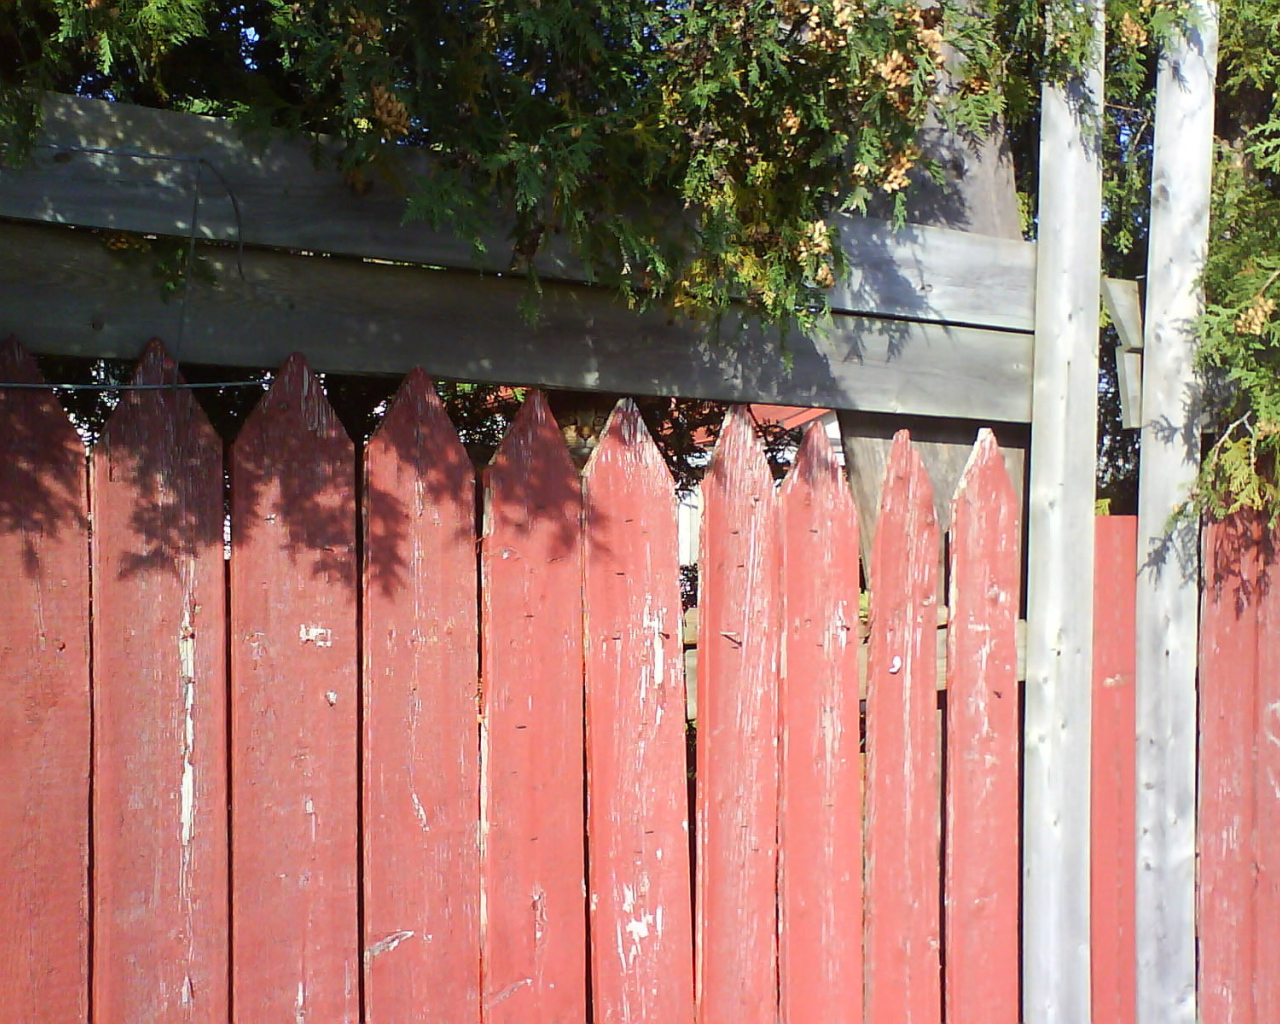 Find the cat on the fence